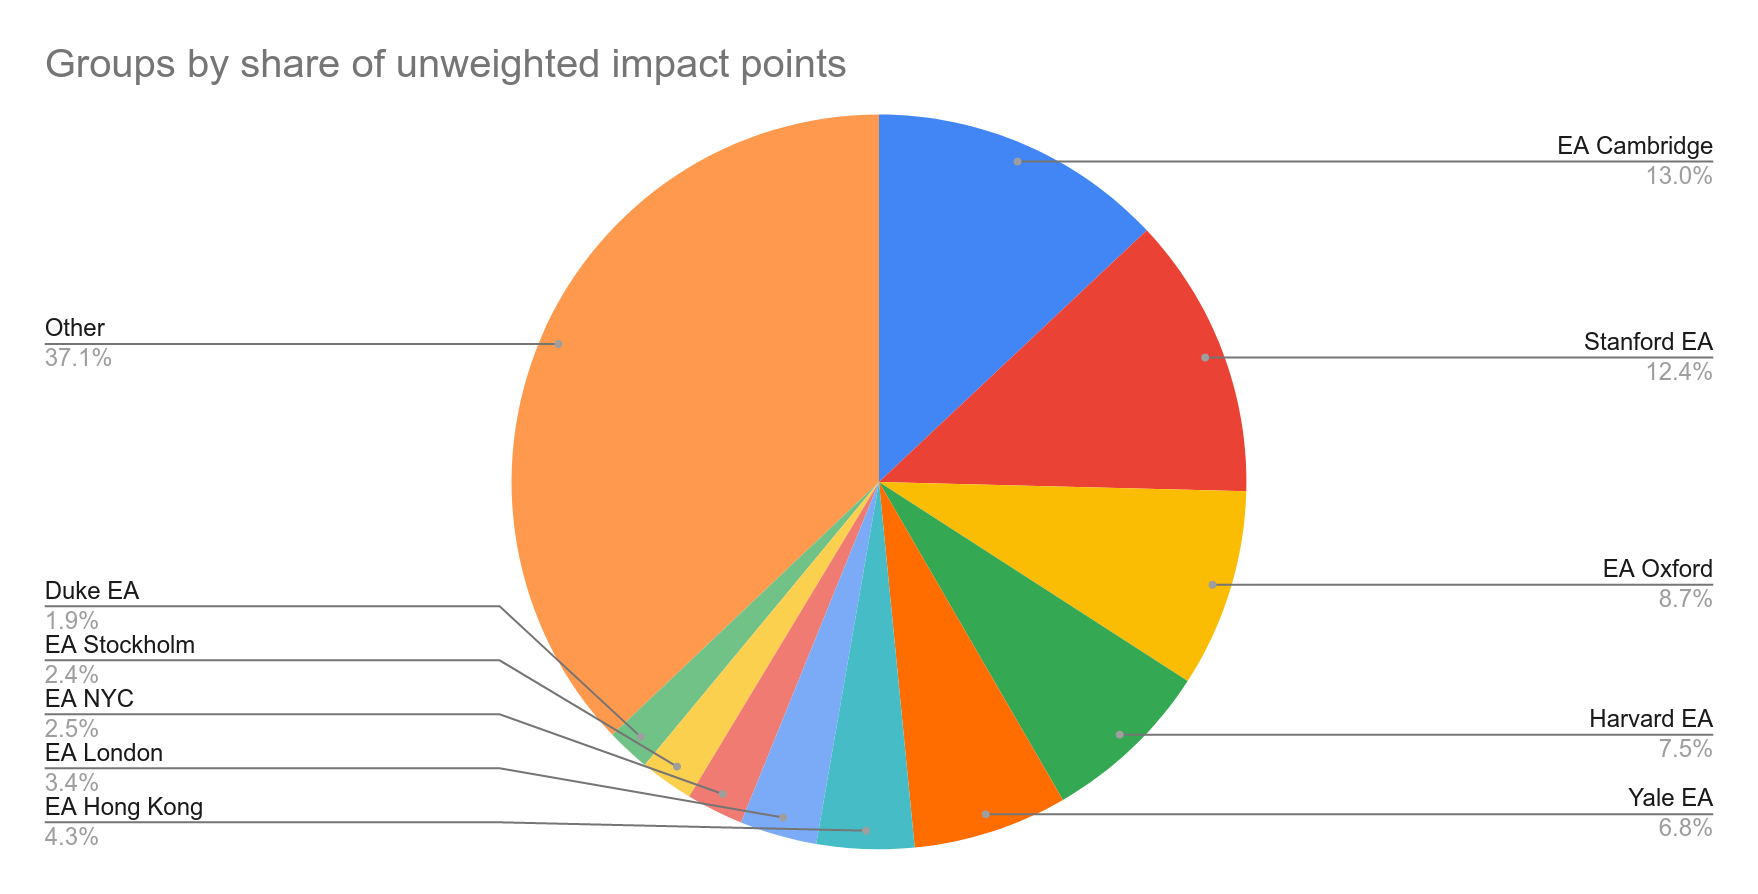 Groups by unweighted impact points